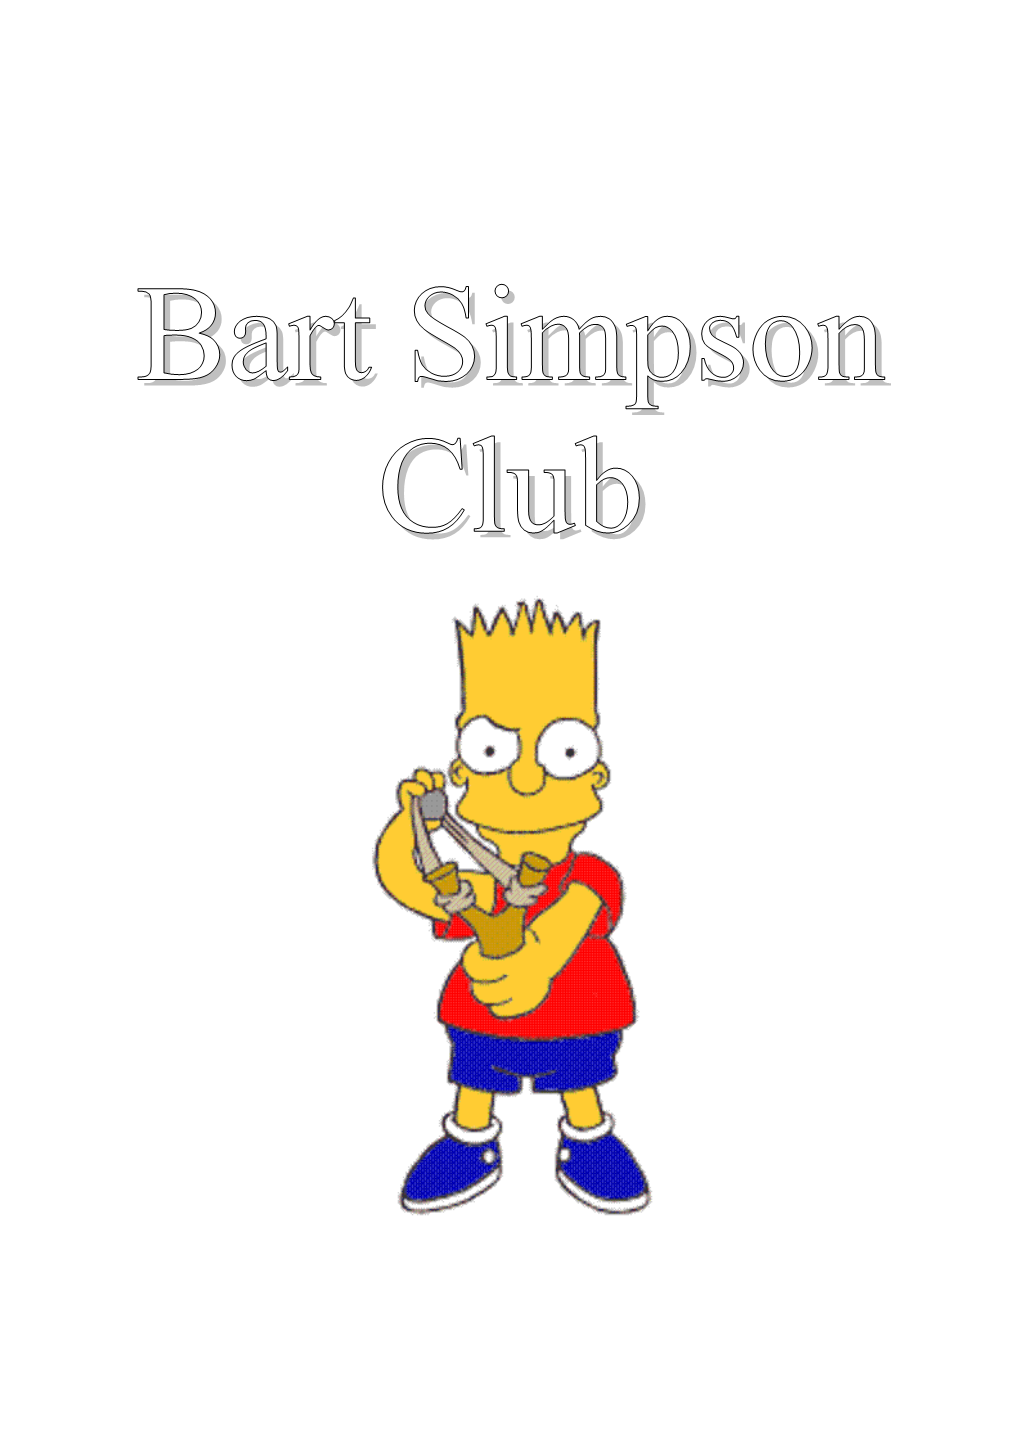 Bart Simpson Club 2020-03-04 the System Played by Mika Salomaa – Pekka Viitasalo V 5.0